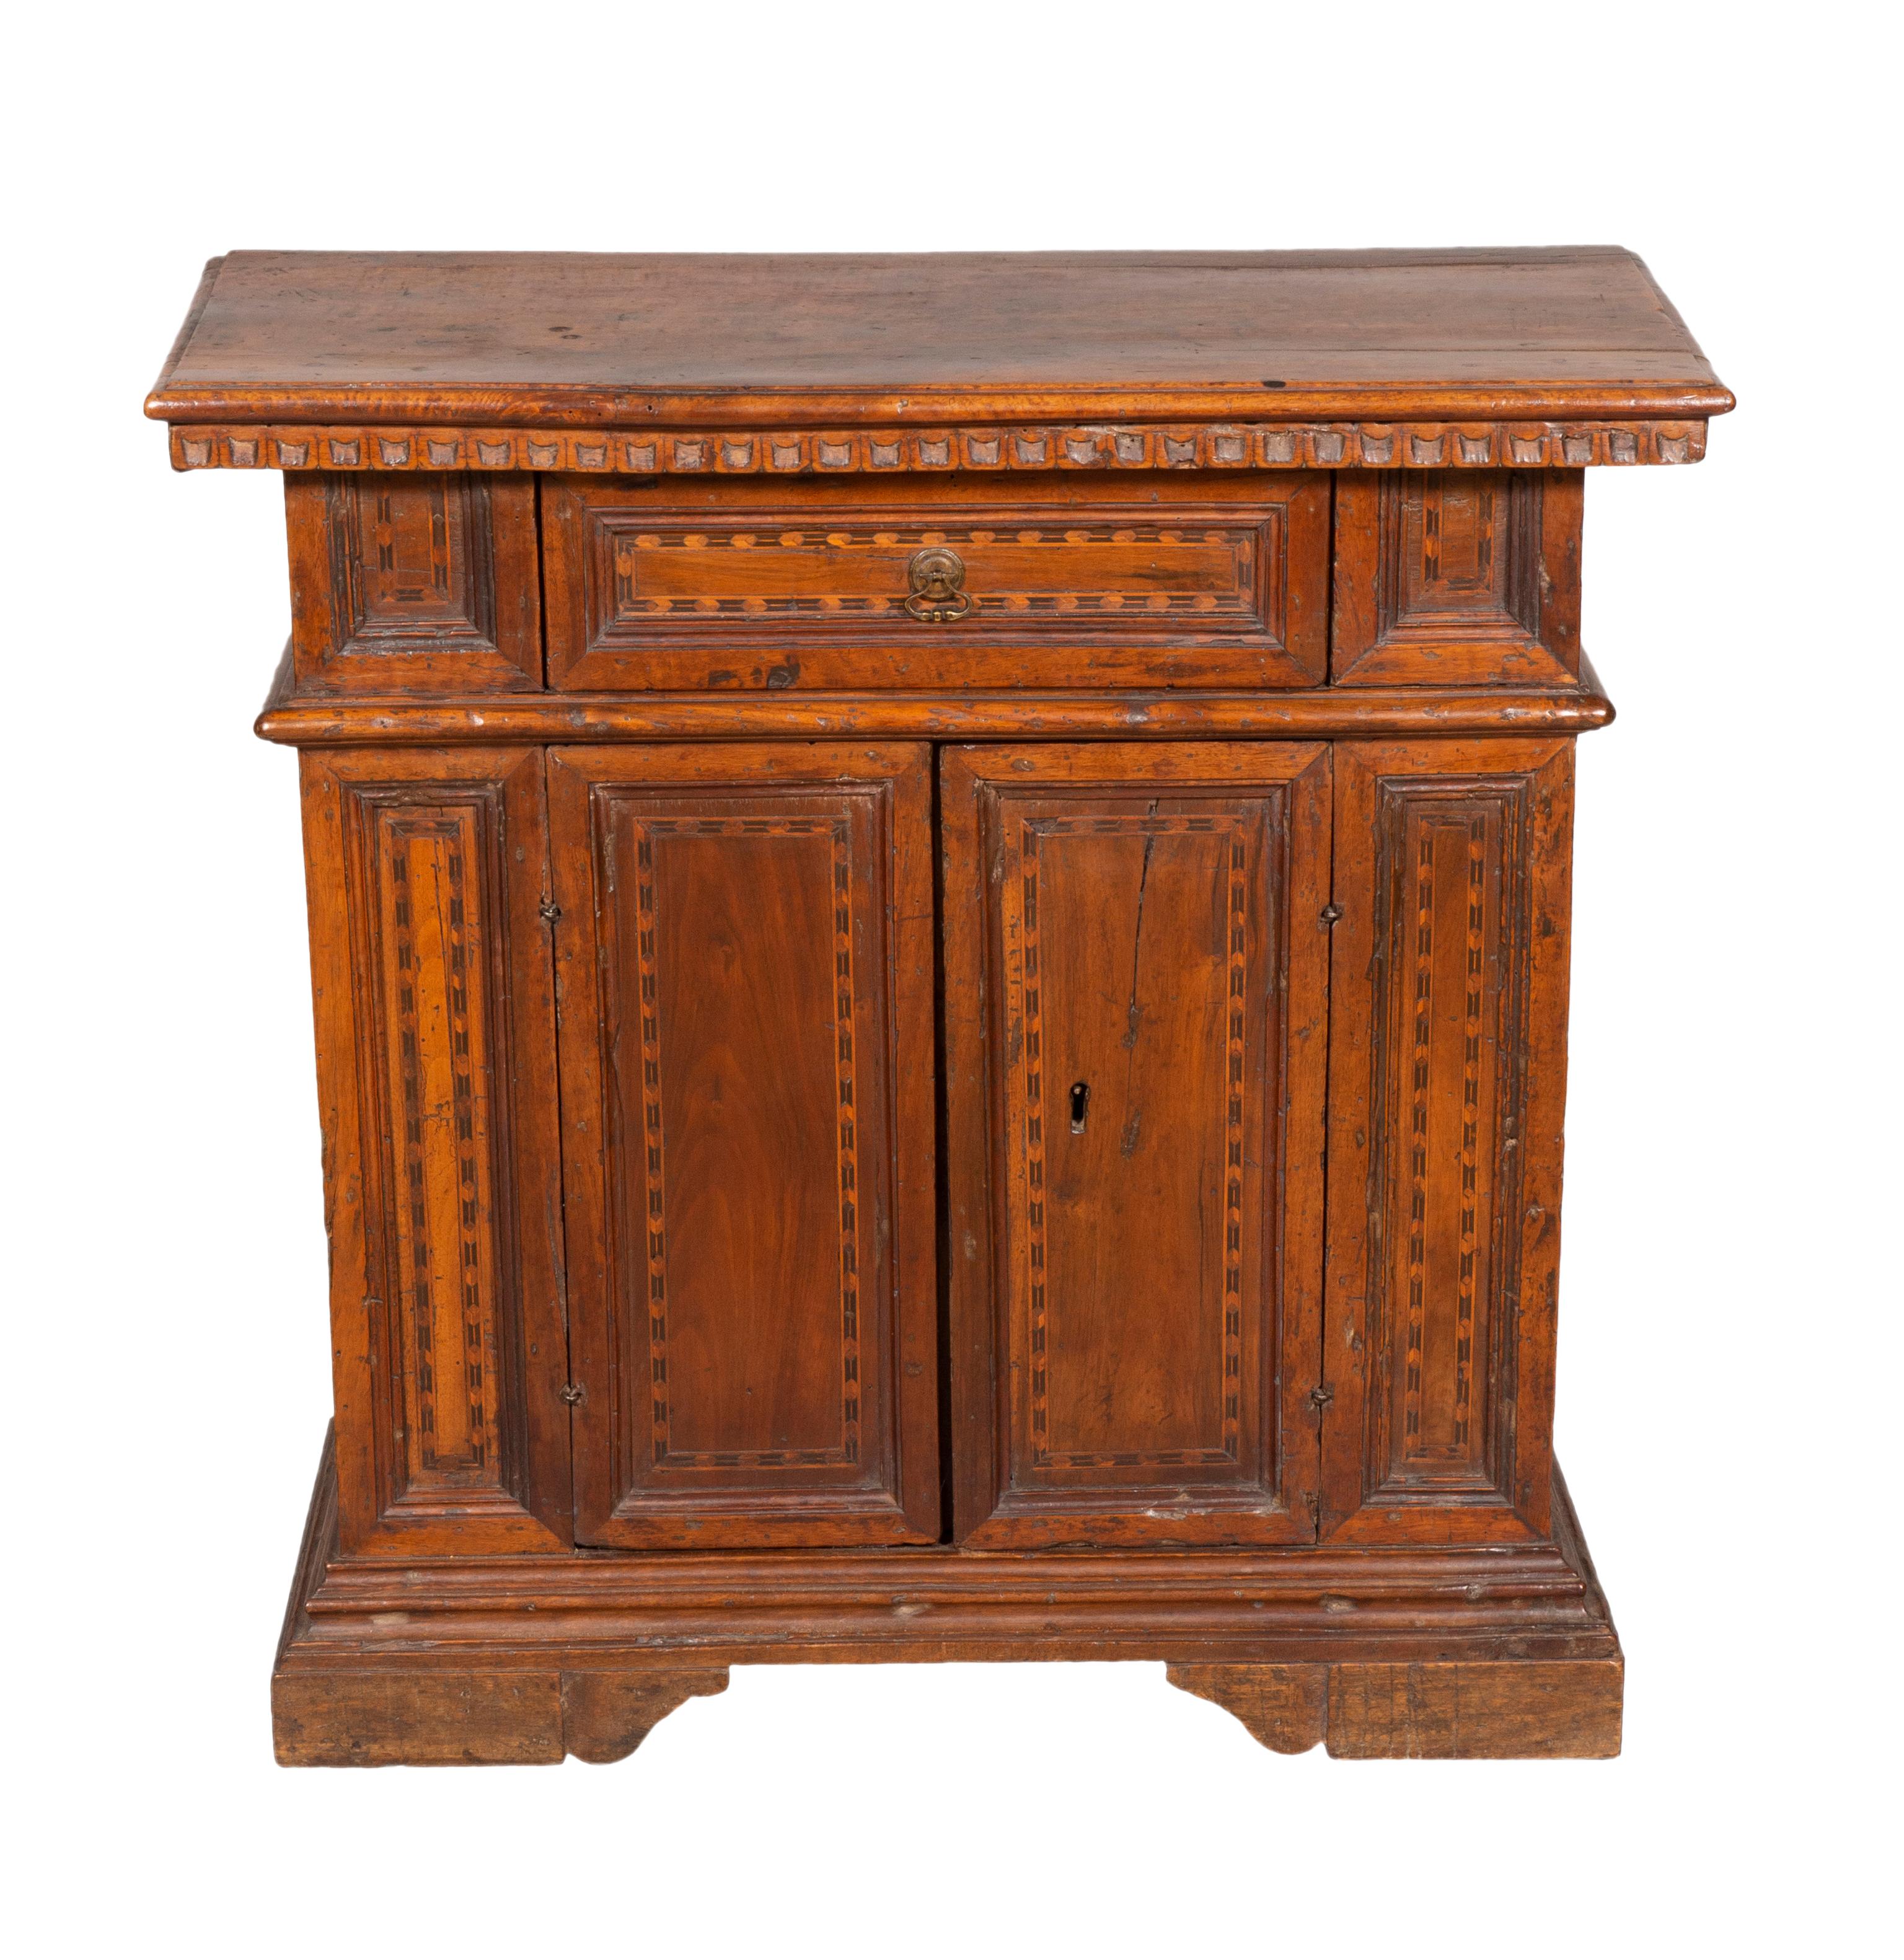 With a rectangular top over a drawer and pair of cabinet doors, bracket base. With inlay around the doors and drawers.